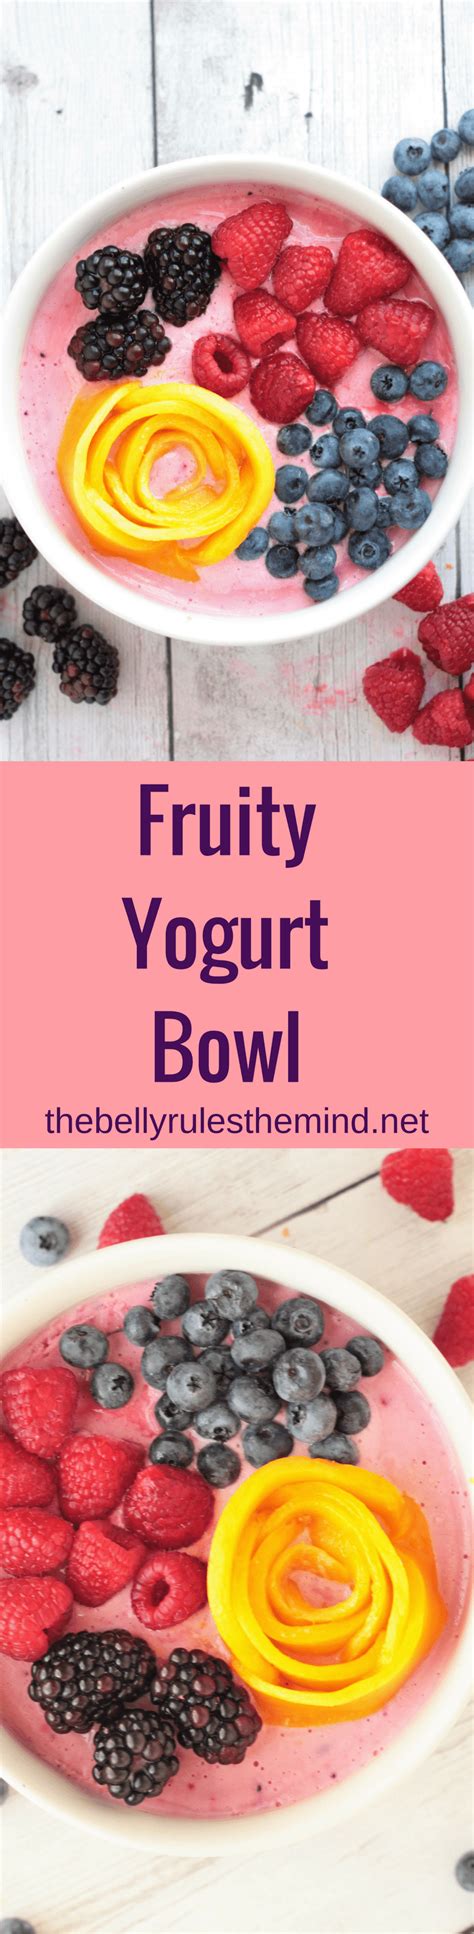 This Fruity Breakfast Yogurt Bowl Is Packed With Fresh Fruits And